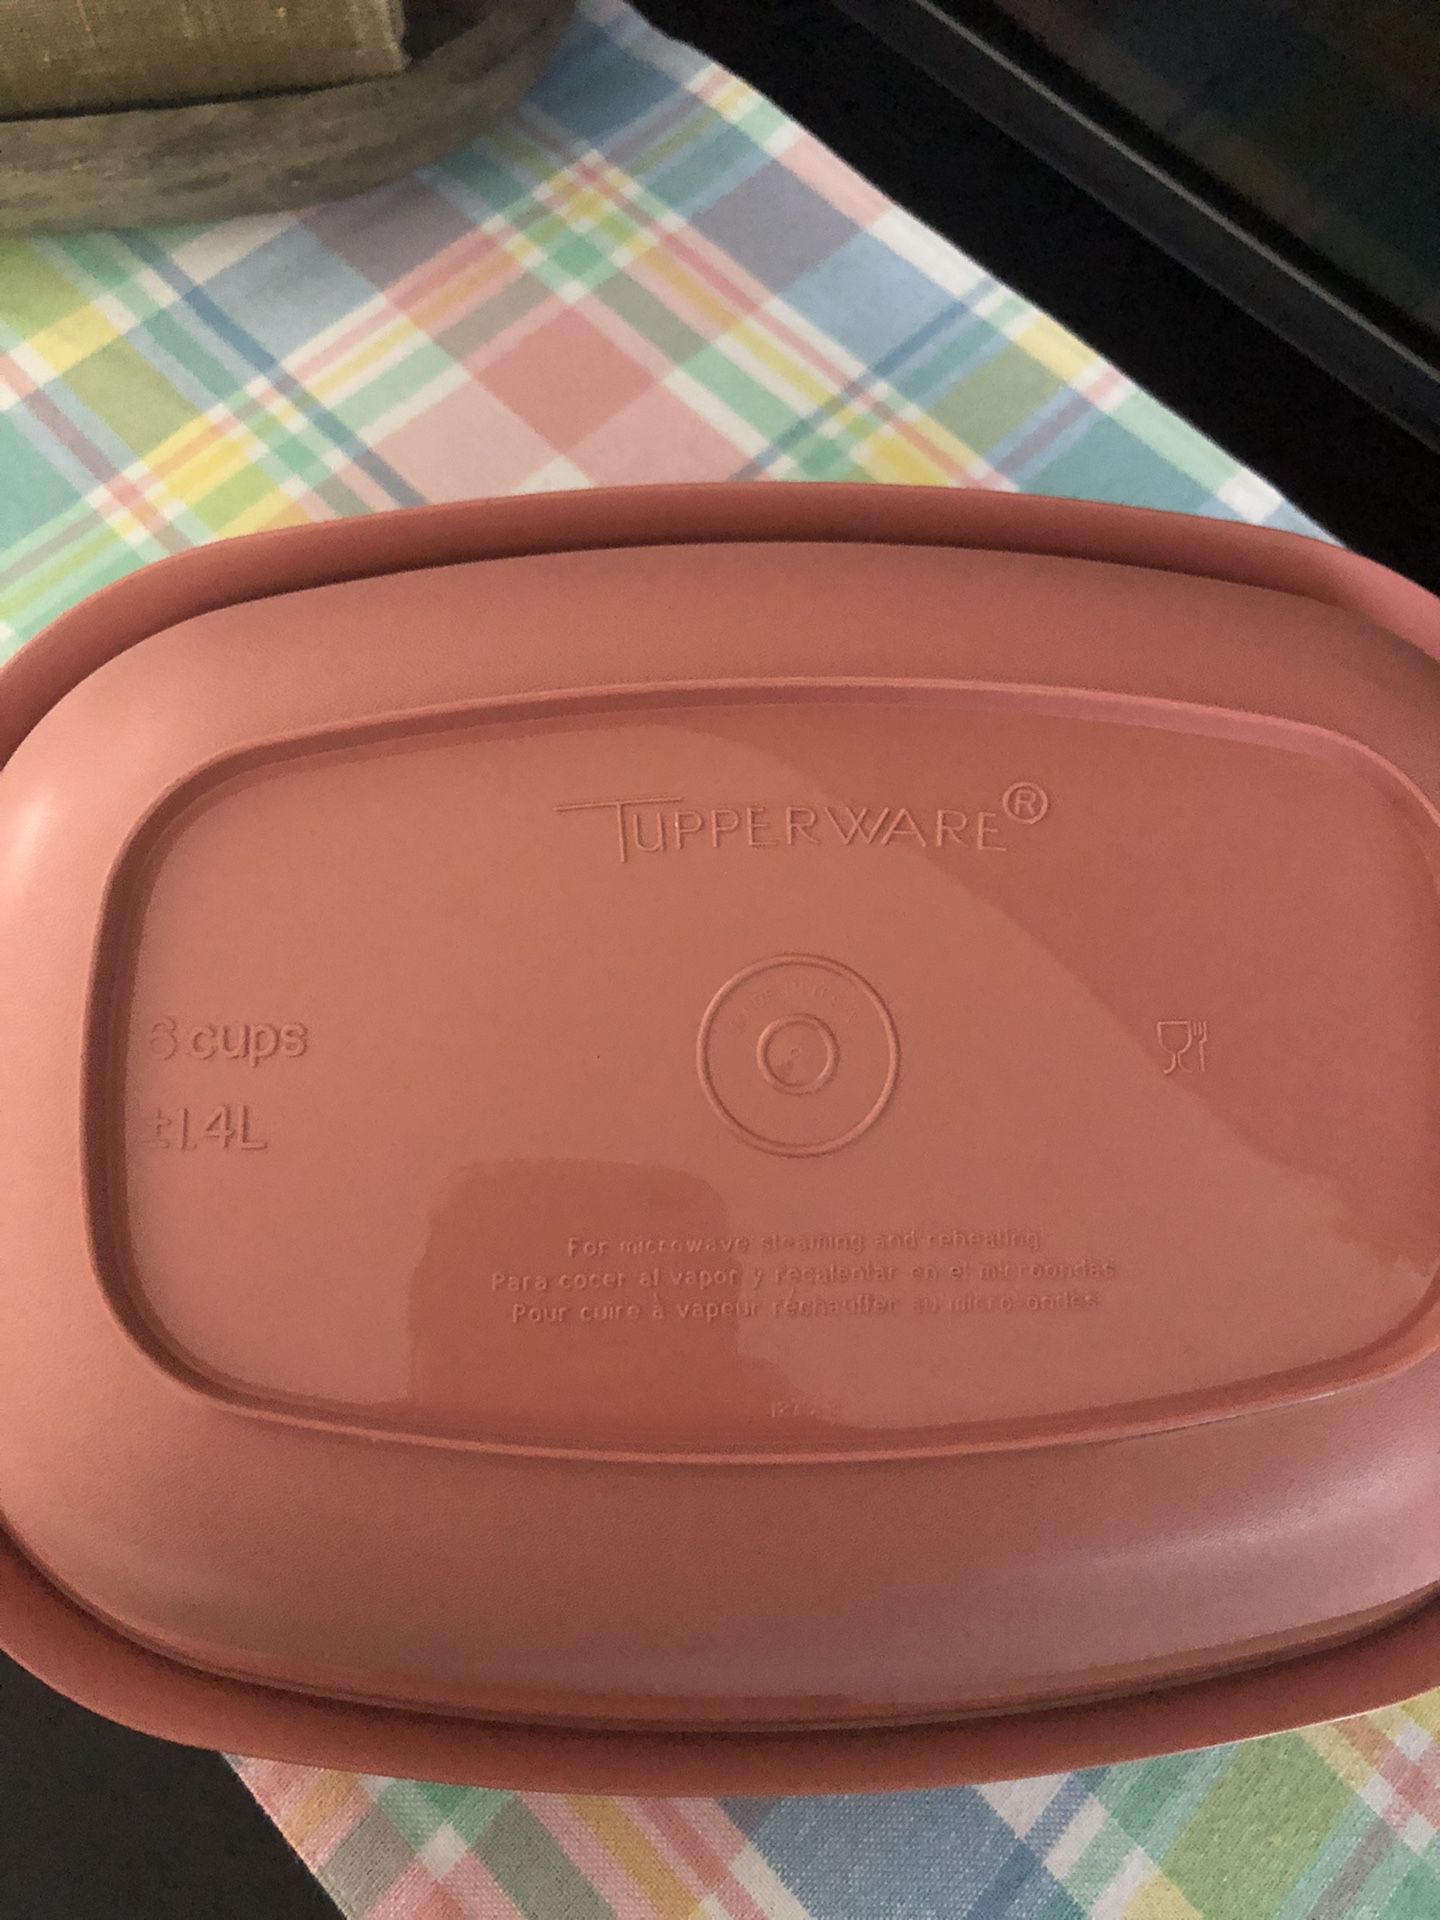 Vintage Large White Tupperware Container for Sale in Escondido, CA - OfferUp